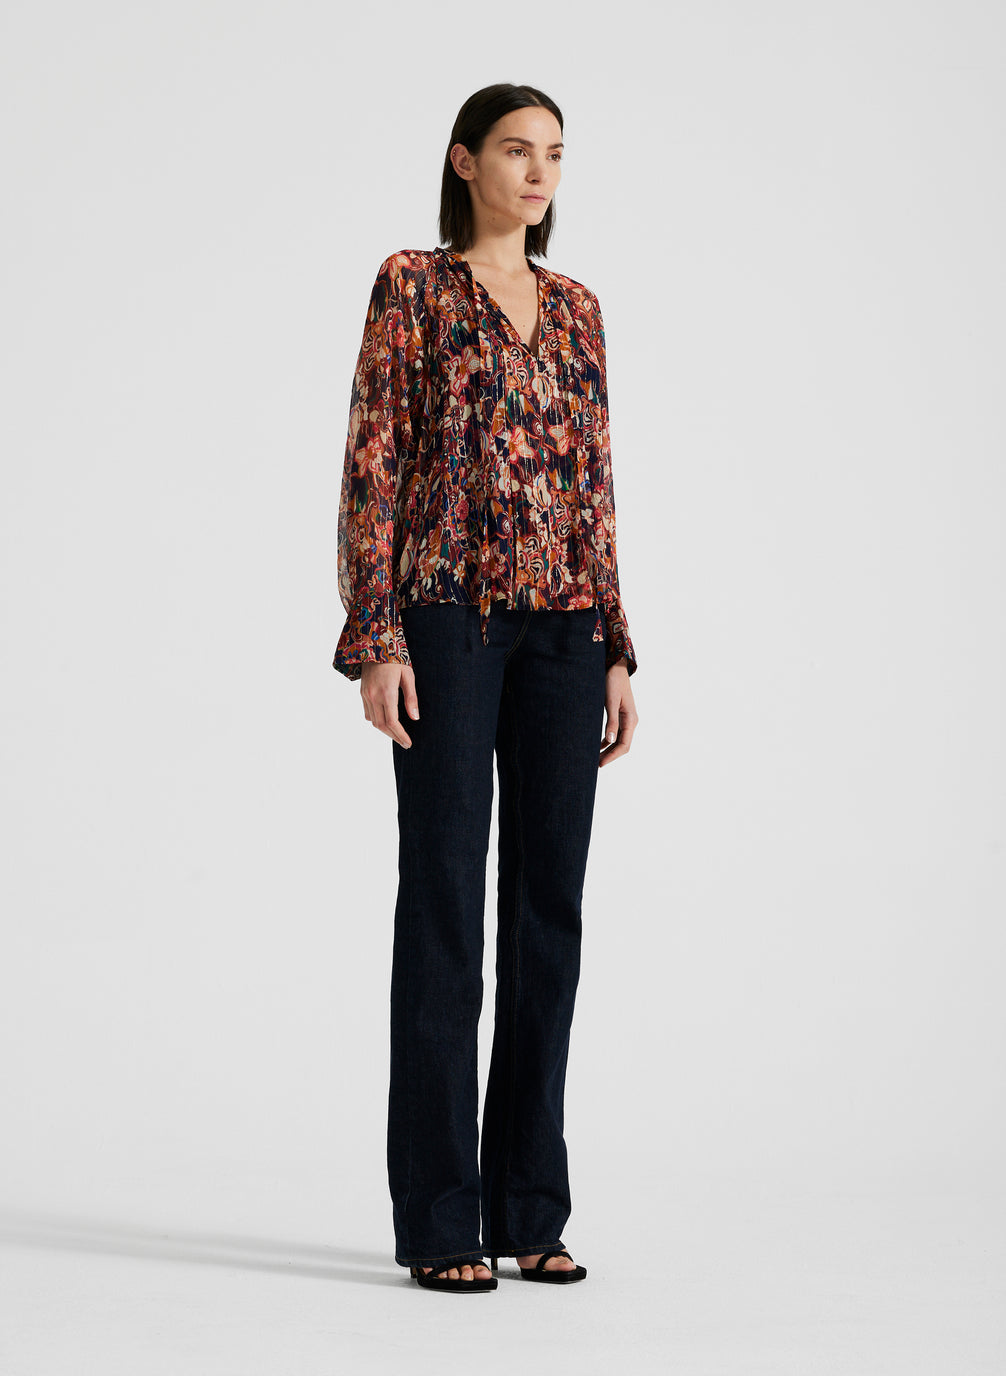 side view of woman wearing silk long sleeve printed blouse and black pants